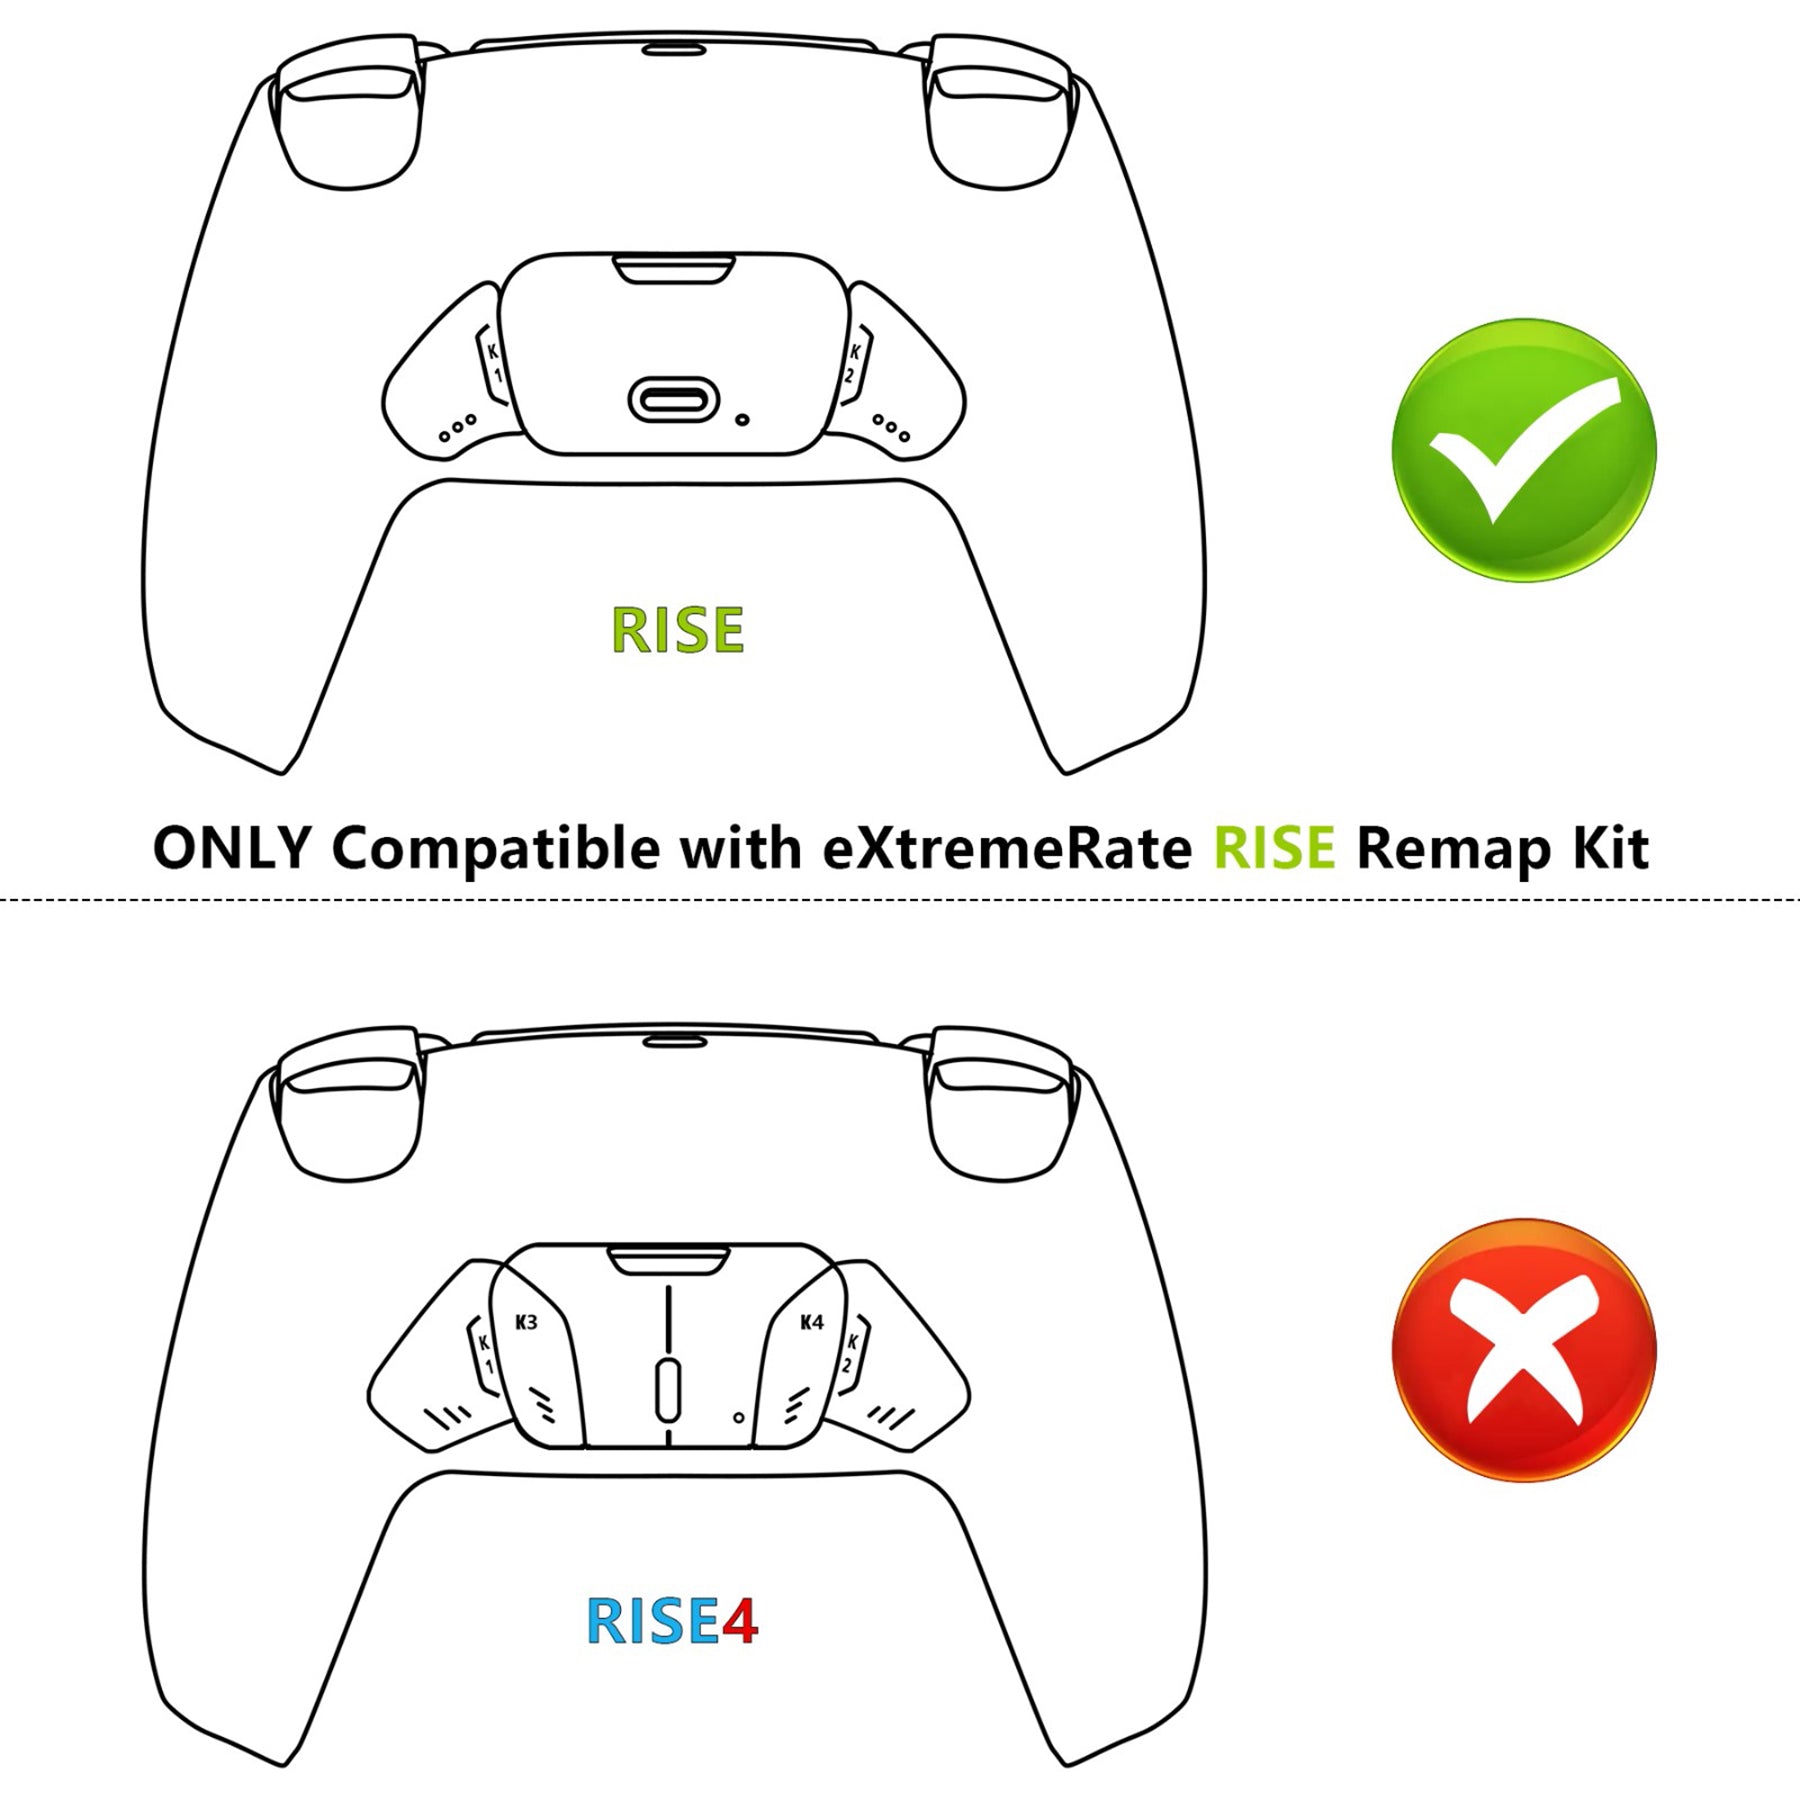 eXtremeRate Real Metal Buttons (RMB) Version Redesigned K1 K2 Back Buttons & Remap PCB Board for eXtremerate RISE Remap Kit, Compatible with PS5 Controller - Black eXtremeRate